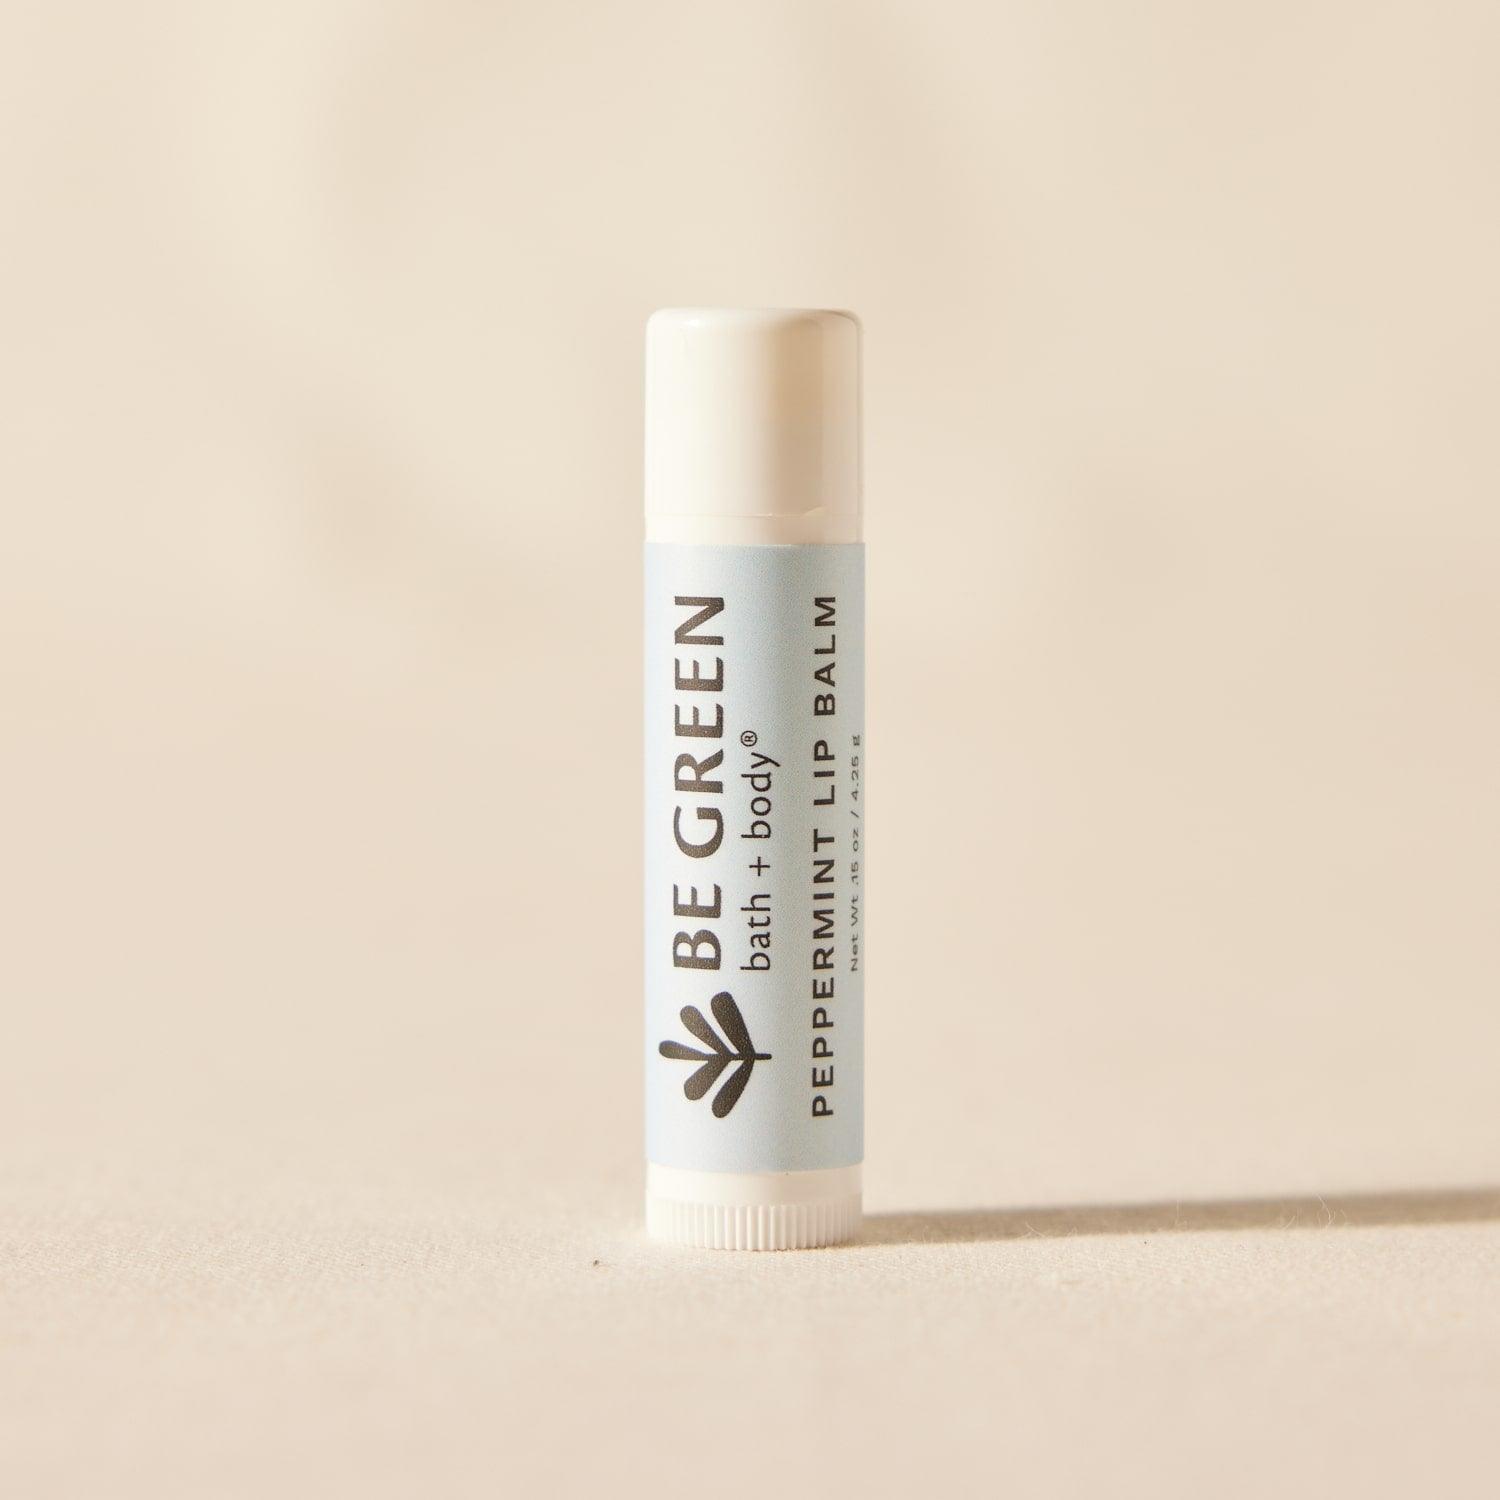 Non toxic peppermint lip balm with zinc oxide and organic peppermint oil.